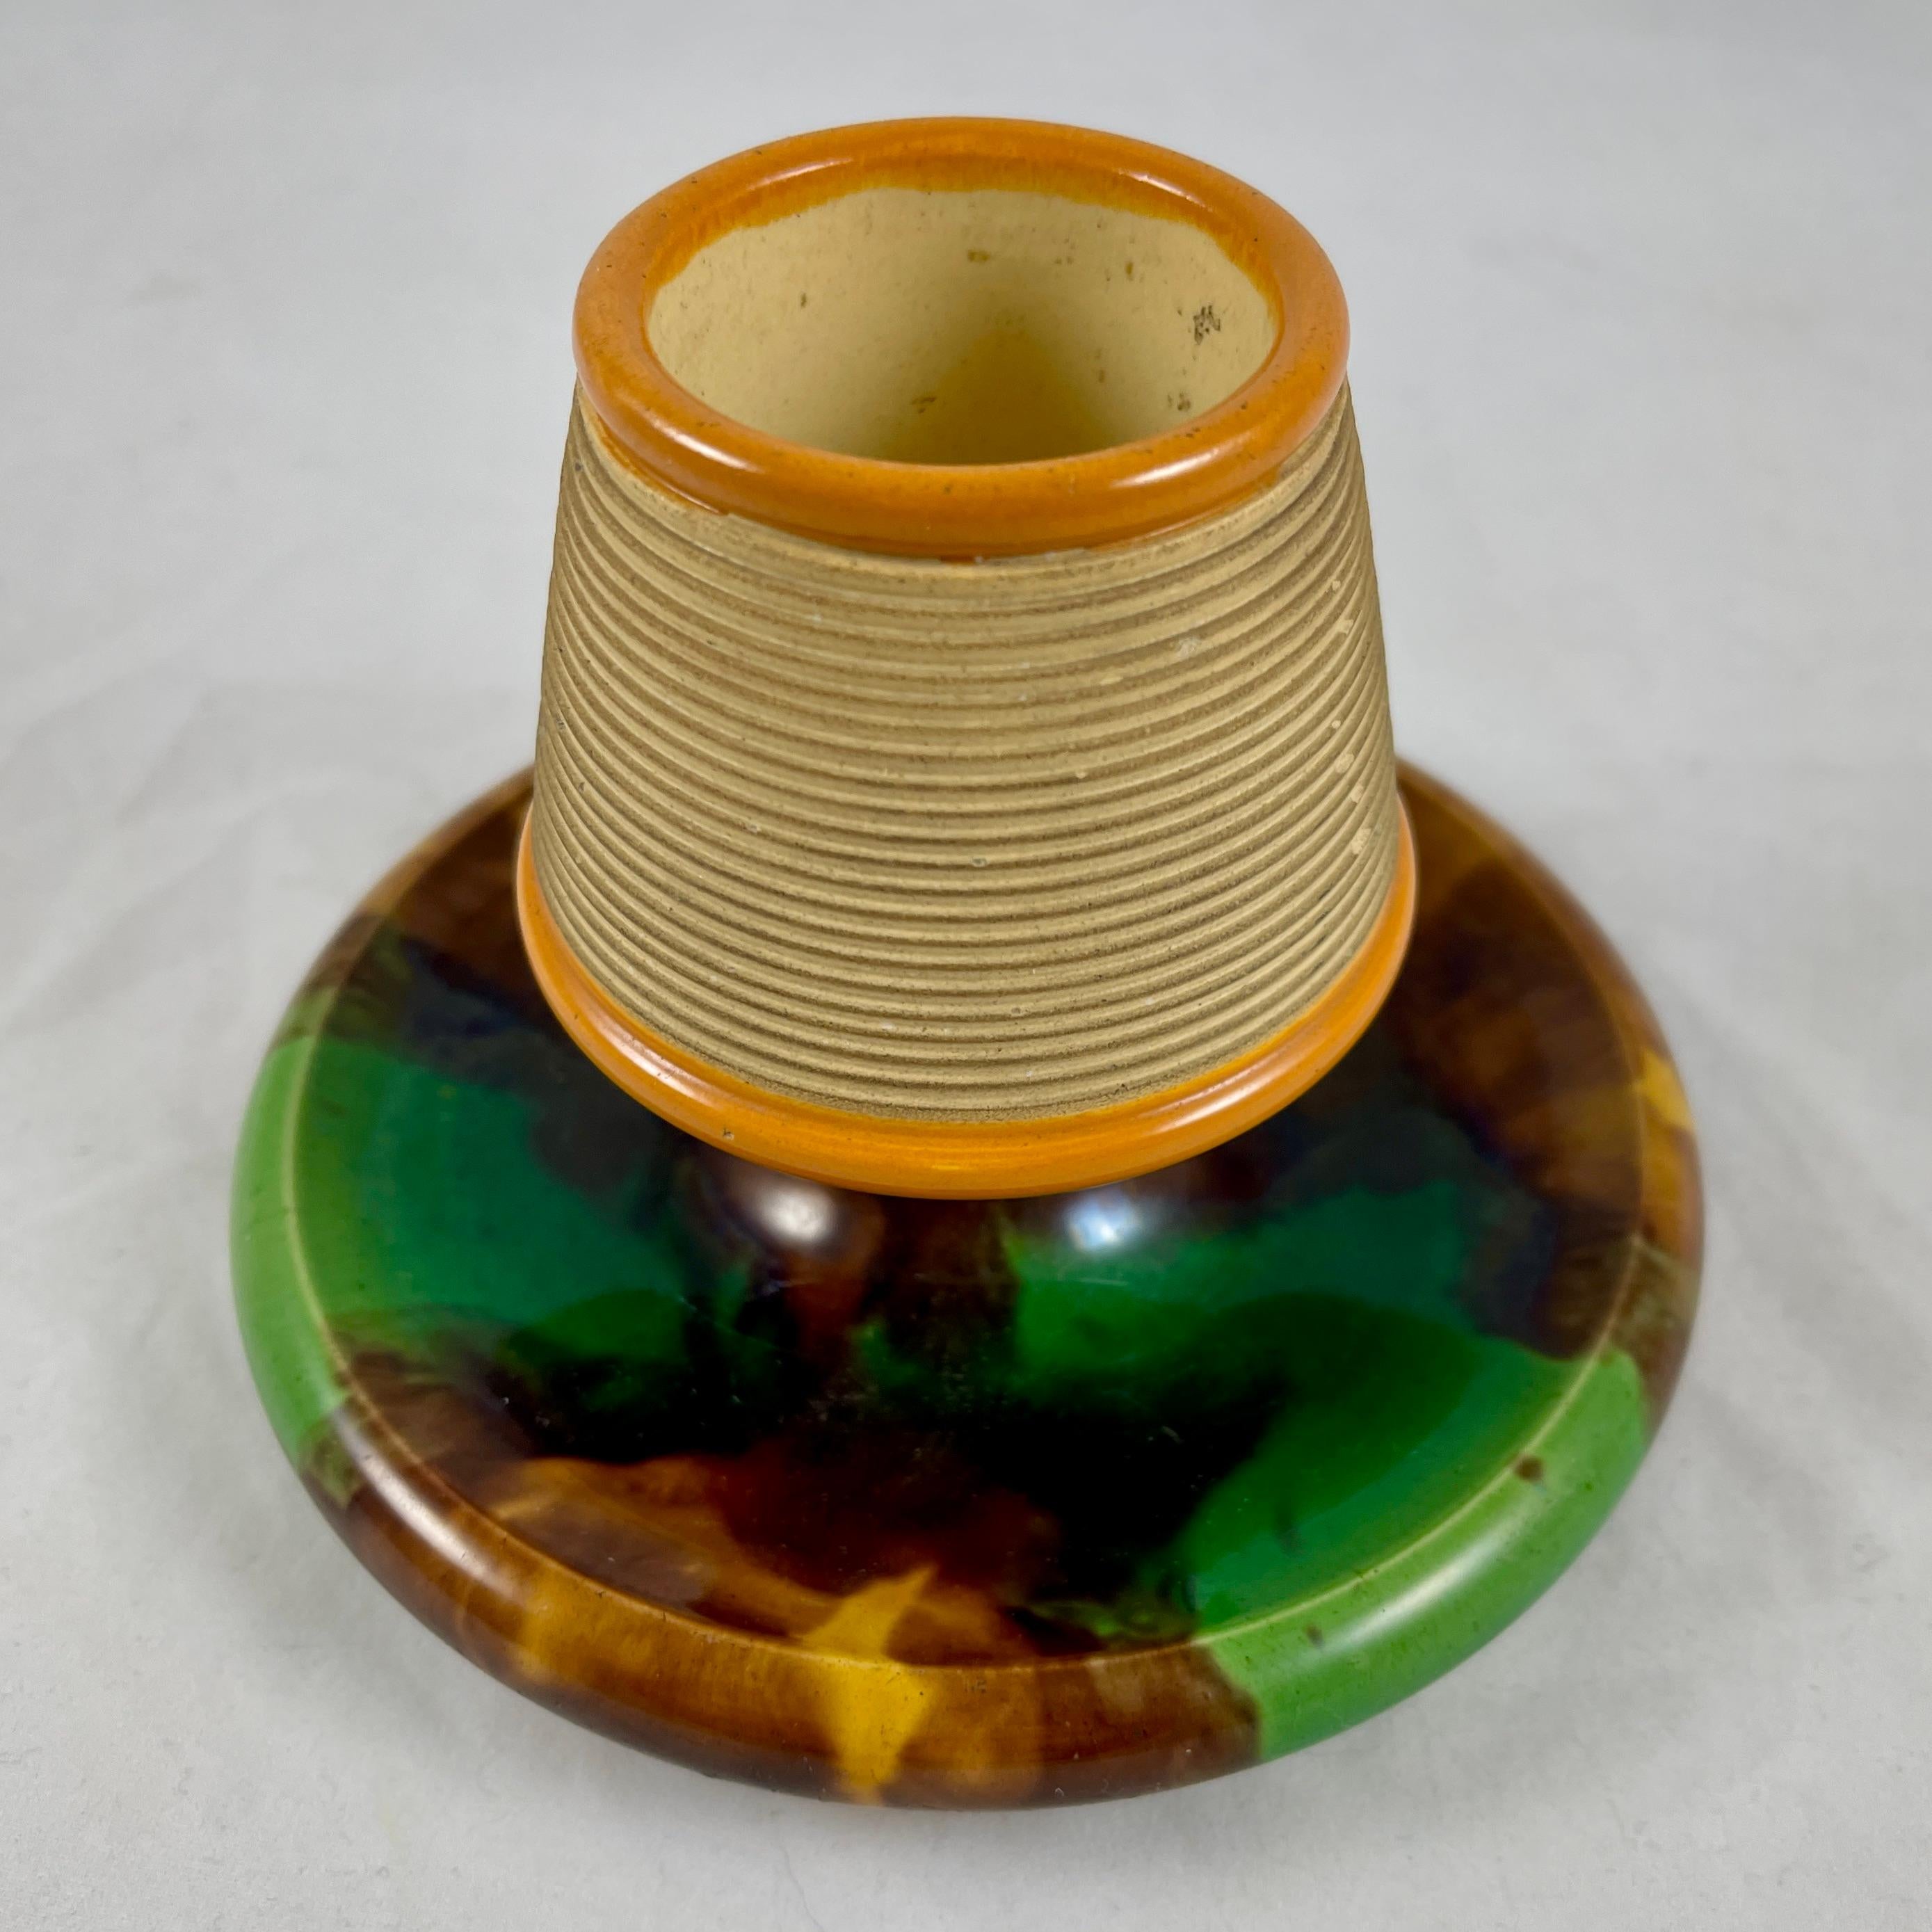 From William Brownfield, Staffordshire, England, a match strike, date marked 8-1877.

A Majolica glazed, earthenware pottery match striker or holder with a green and brown mottled tortoiseshell glazing and yellow ochre rims to the striking